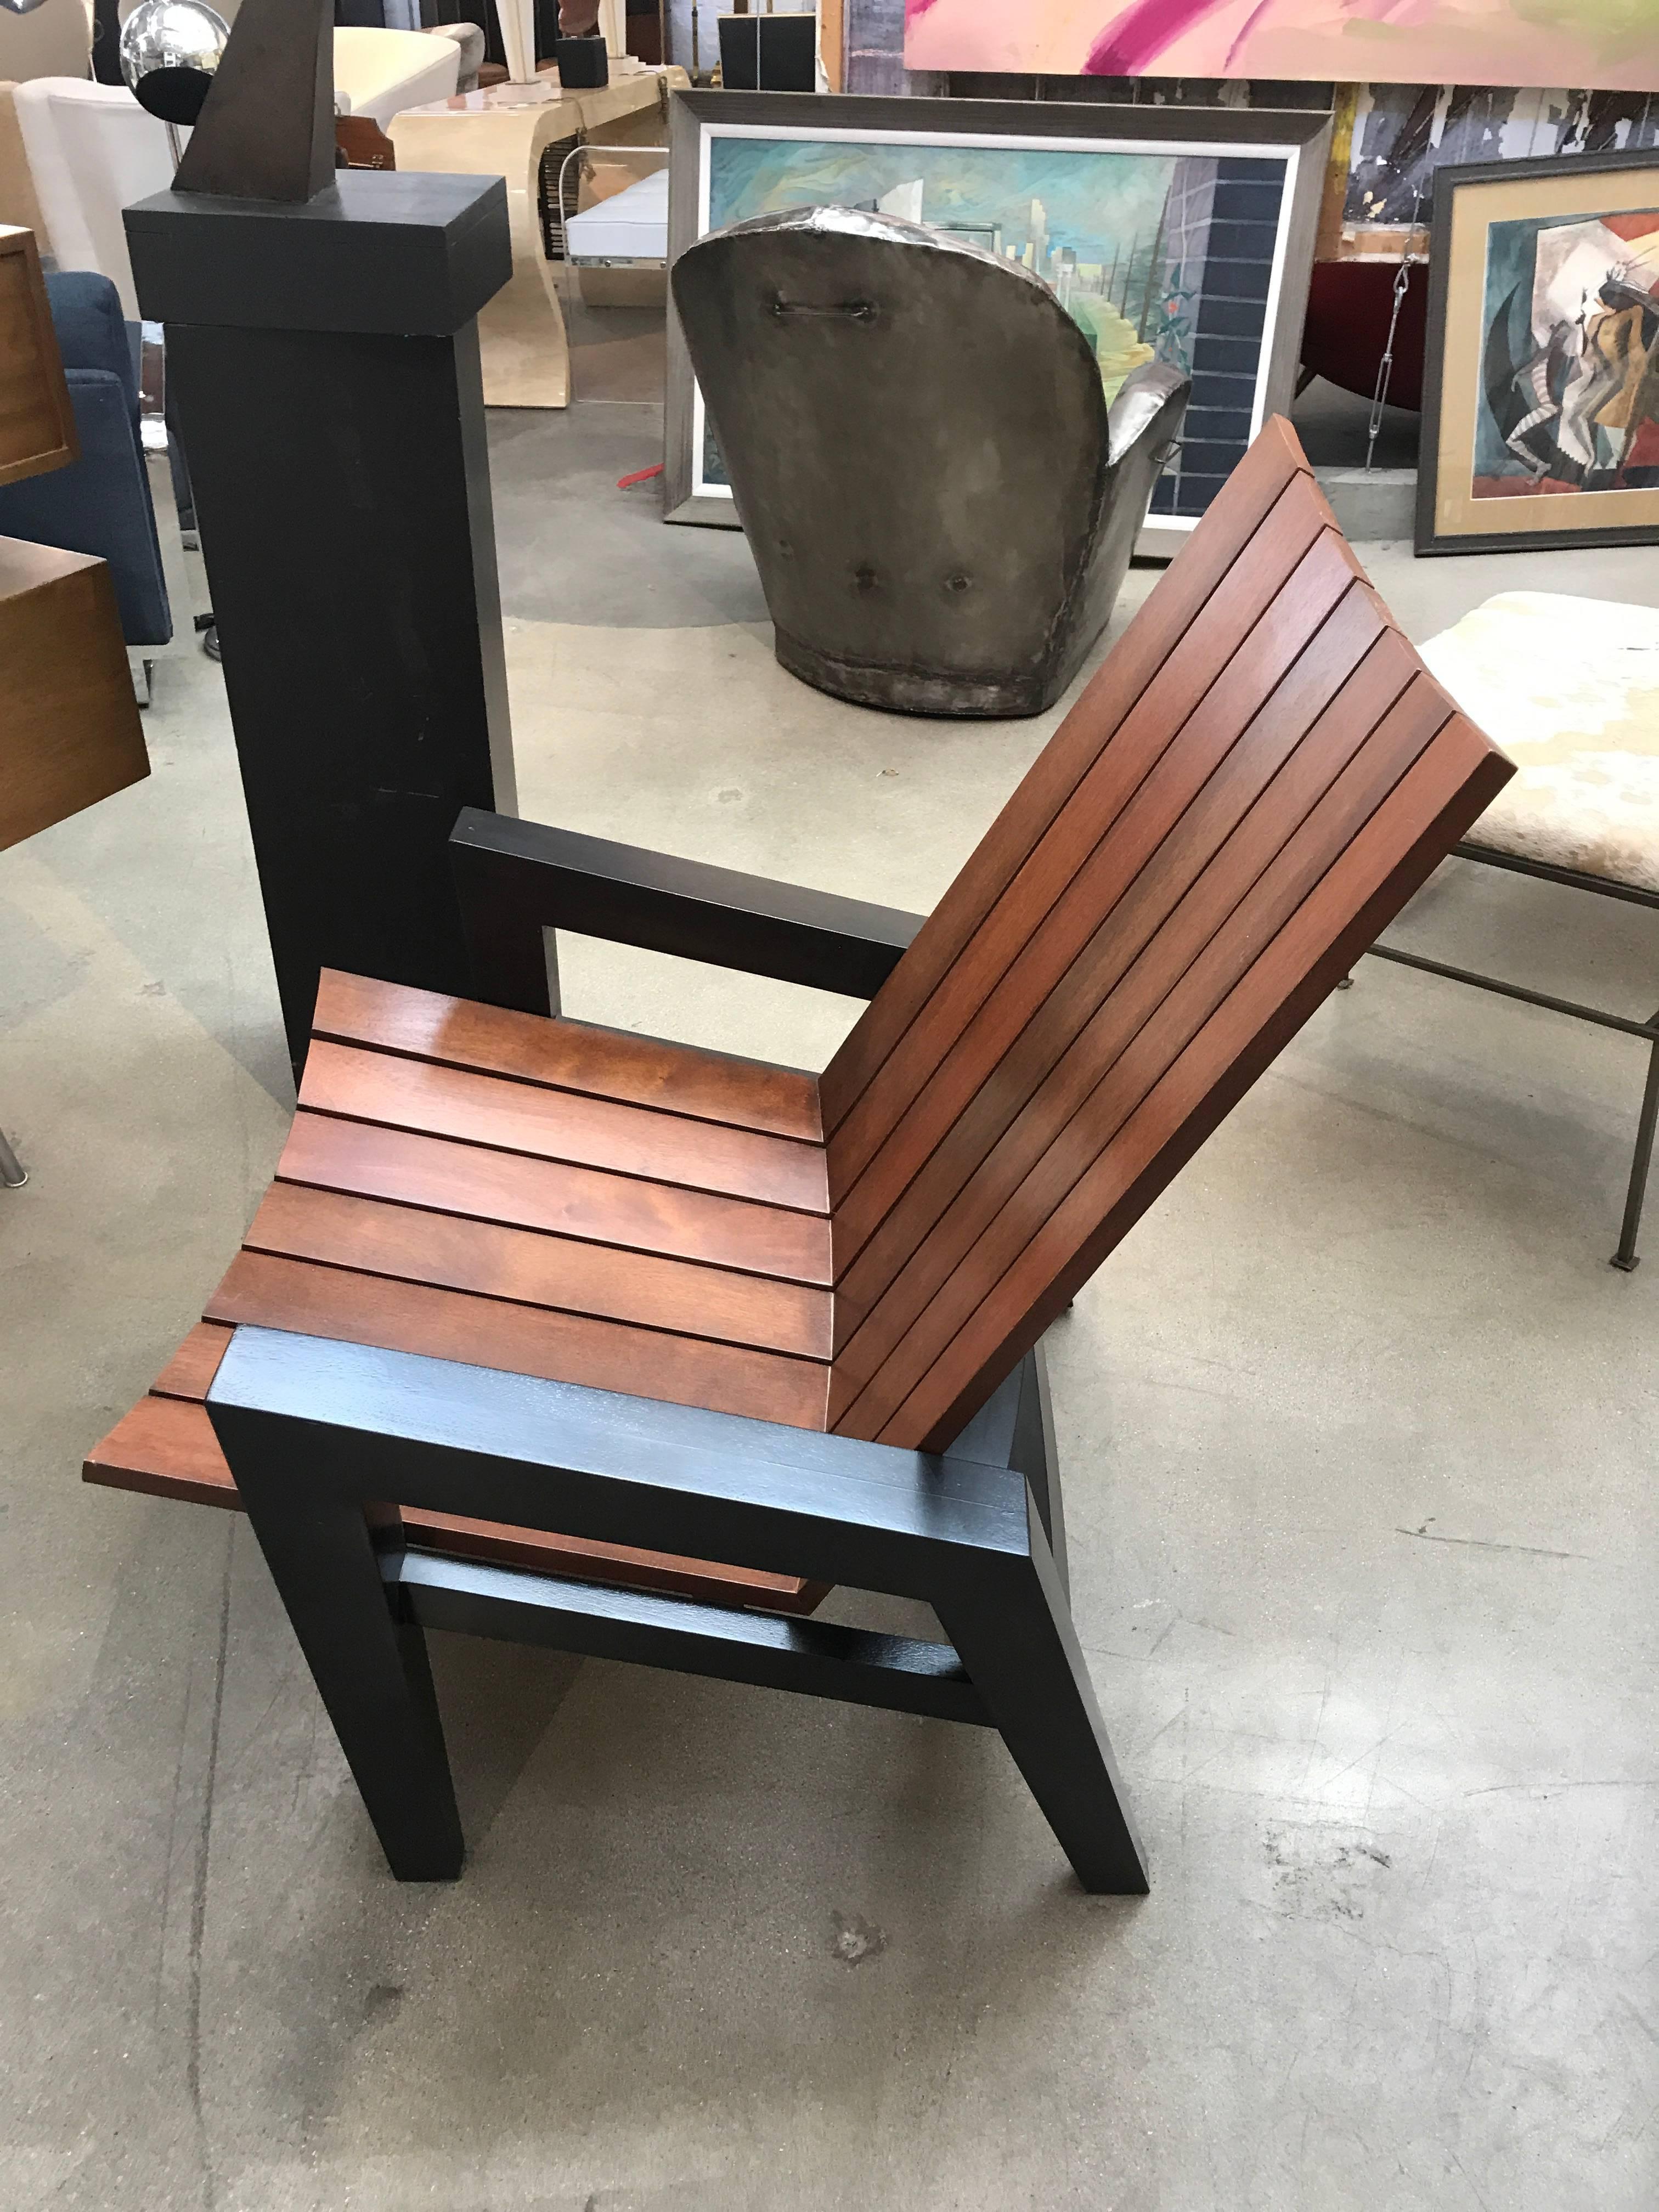 A unique prototype chair by the re-known architect and furniture designer Rob Edley Welborn. This chair never went into production and was built in his studio in New Mexico. It is surprisingly comfortable as well as being a sculptural beauty. It is